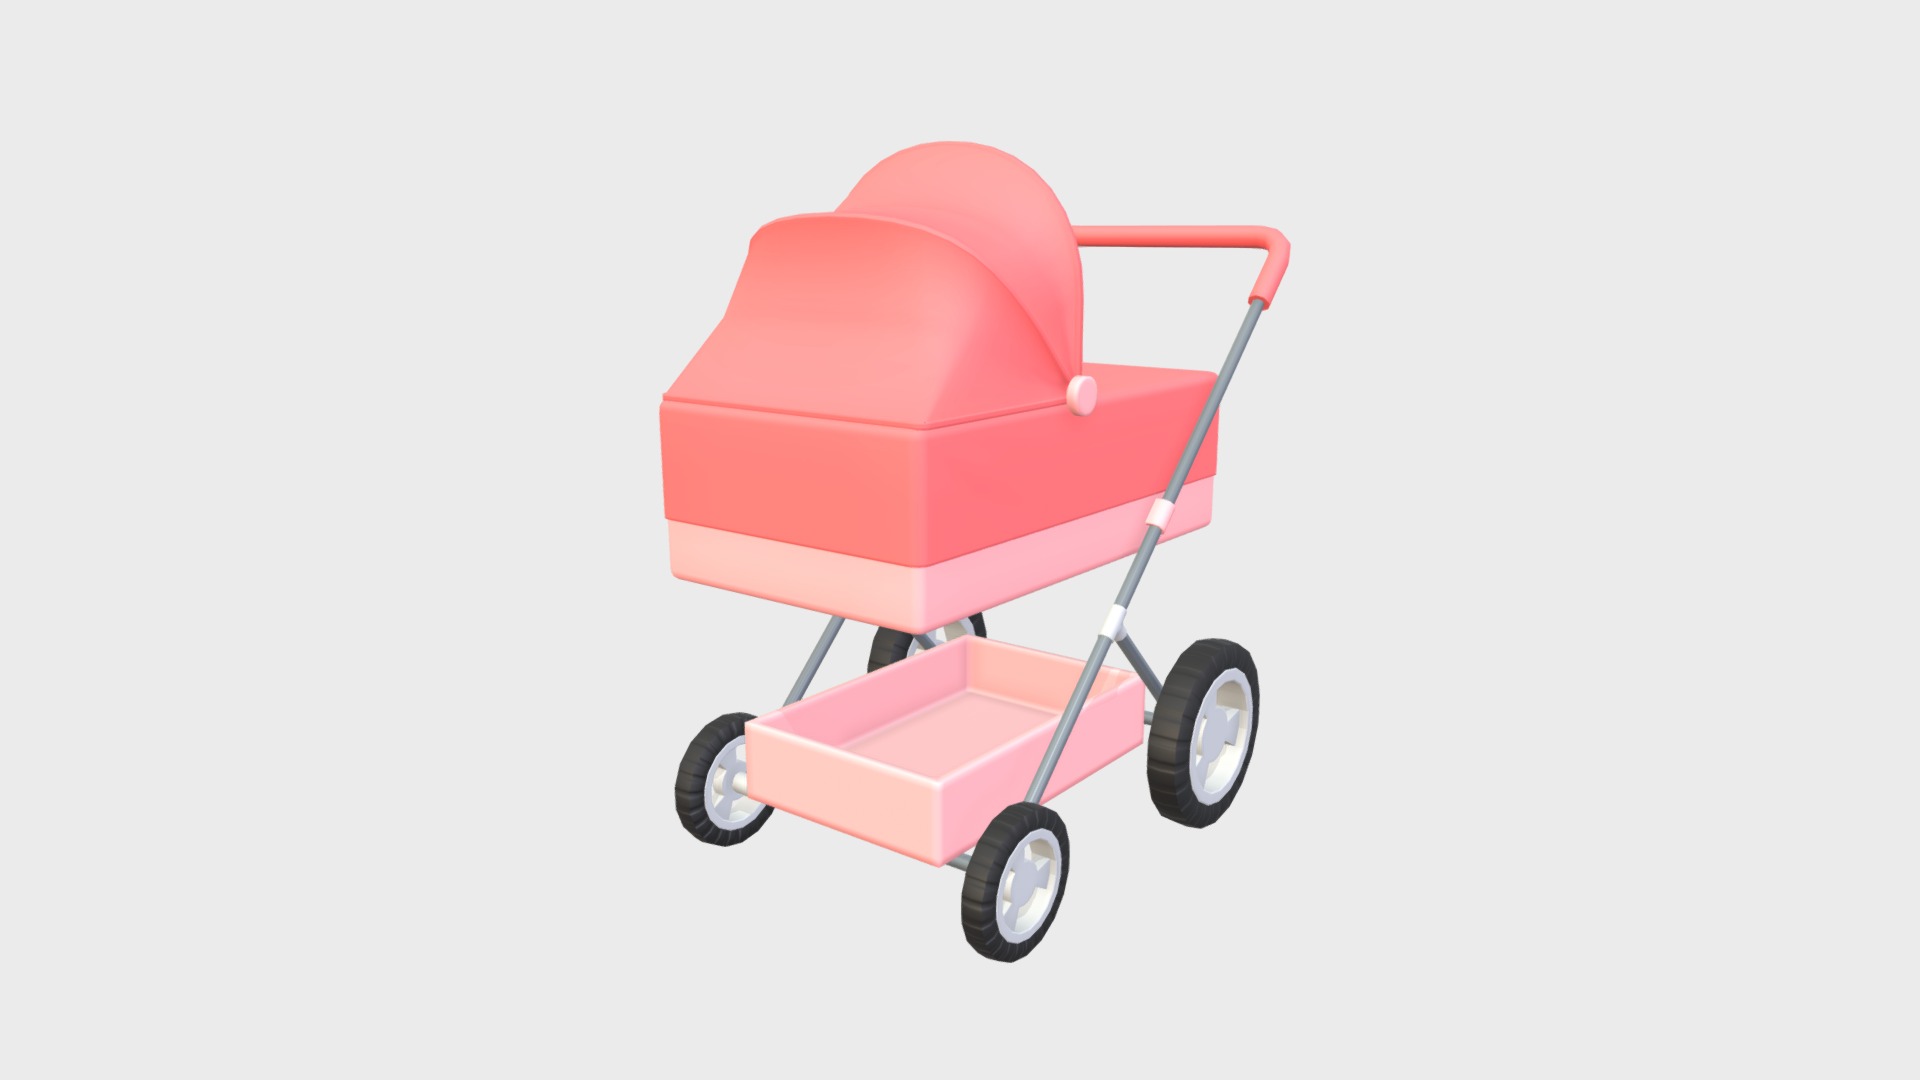 3D model Pram - This is a 3D model of the Pram. The 3D model is about a red lawn chair.